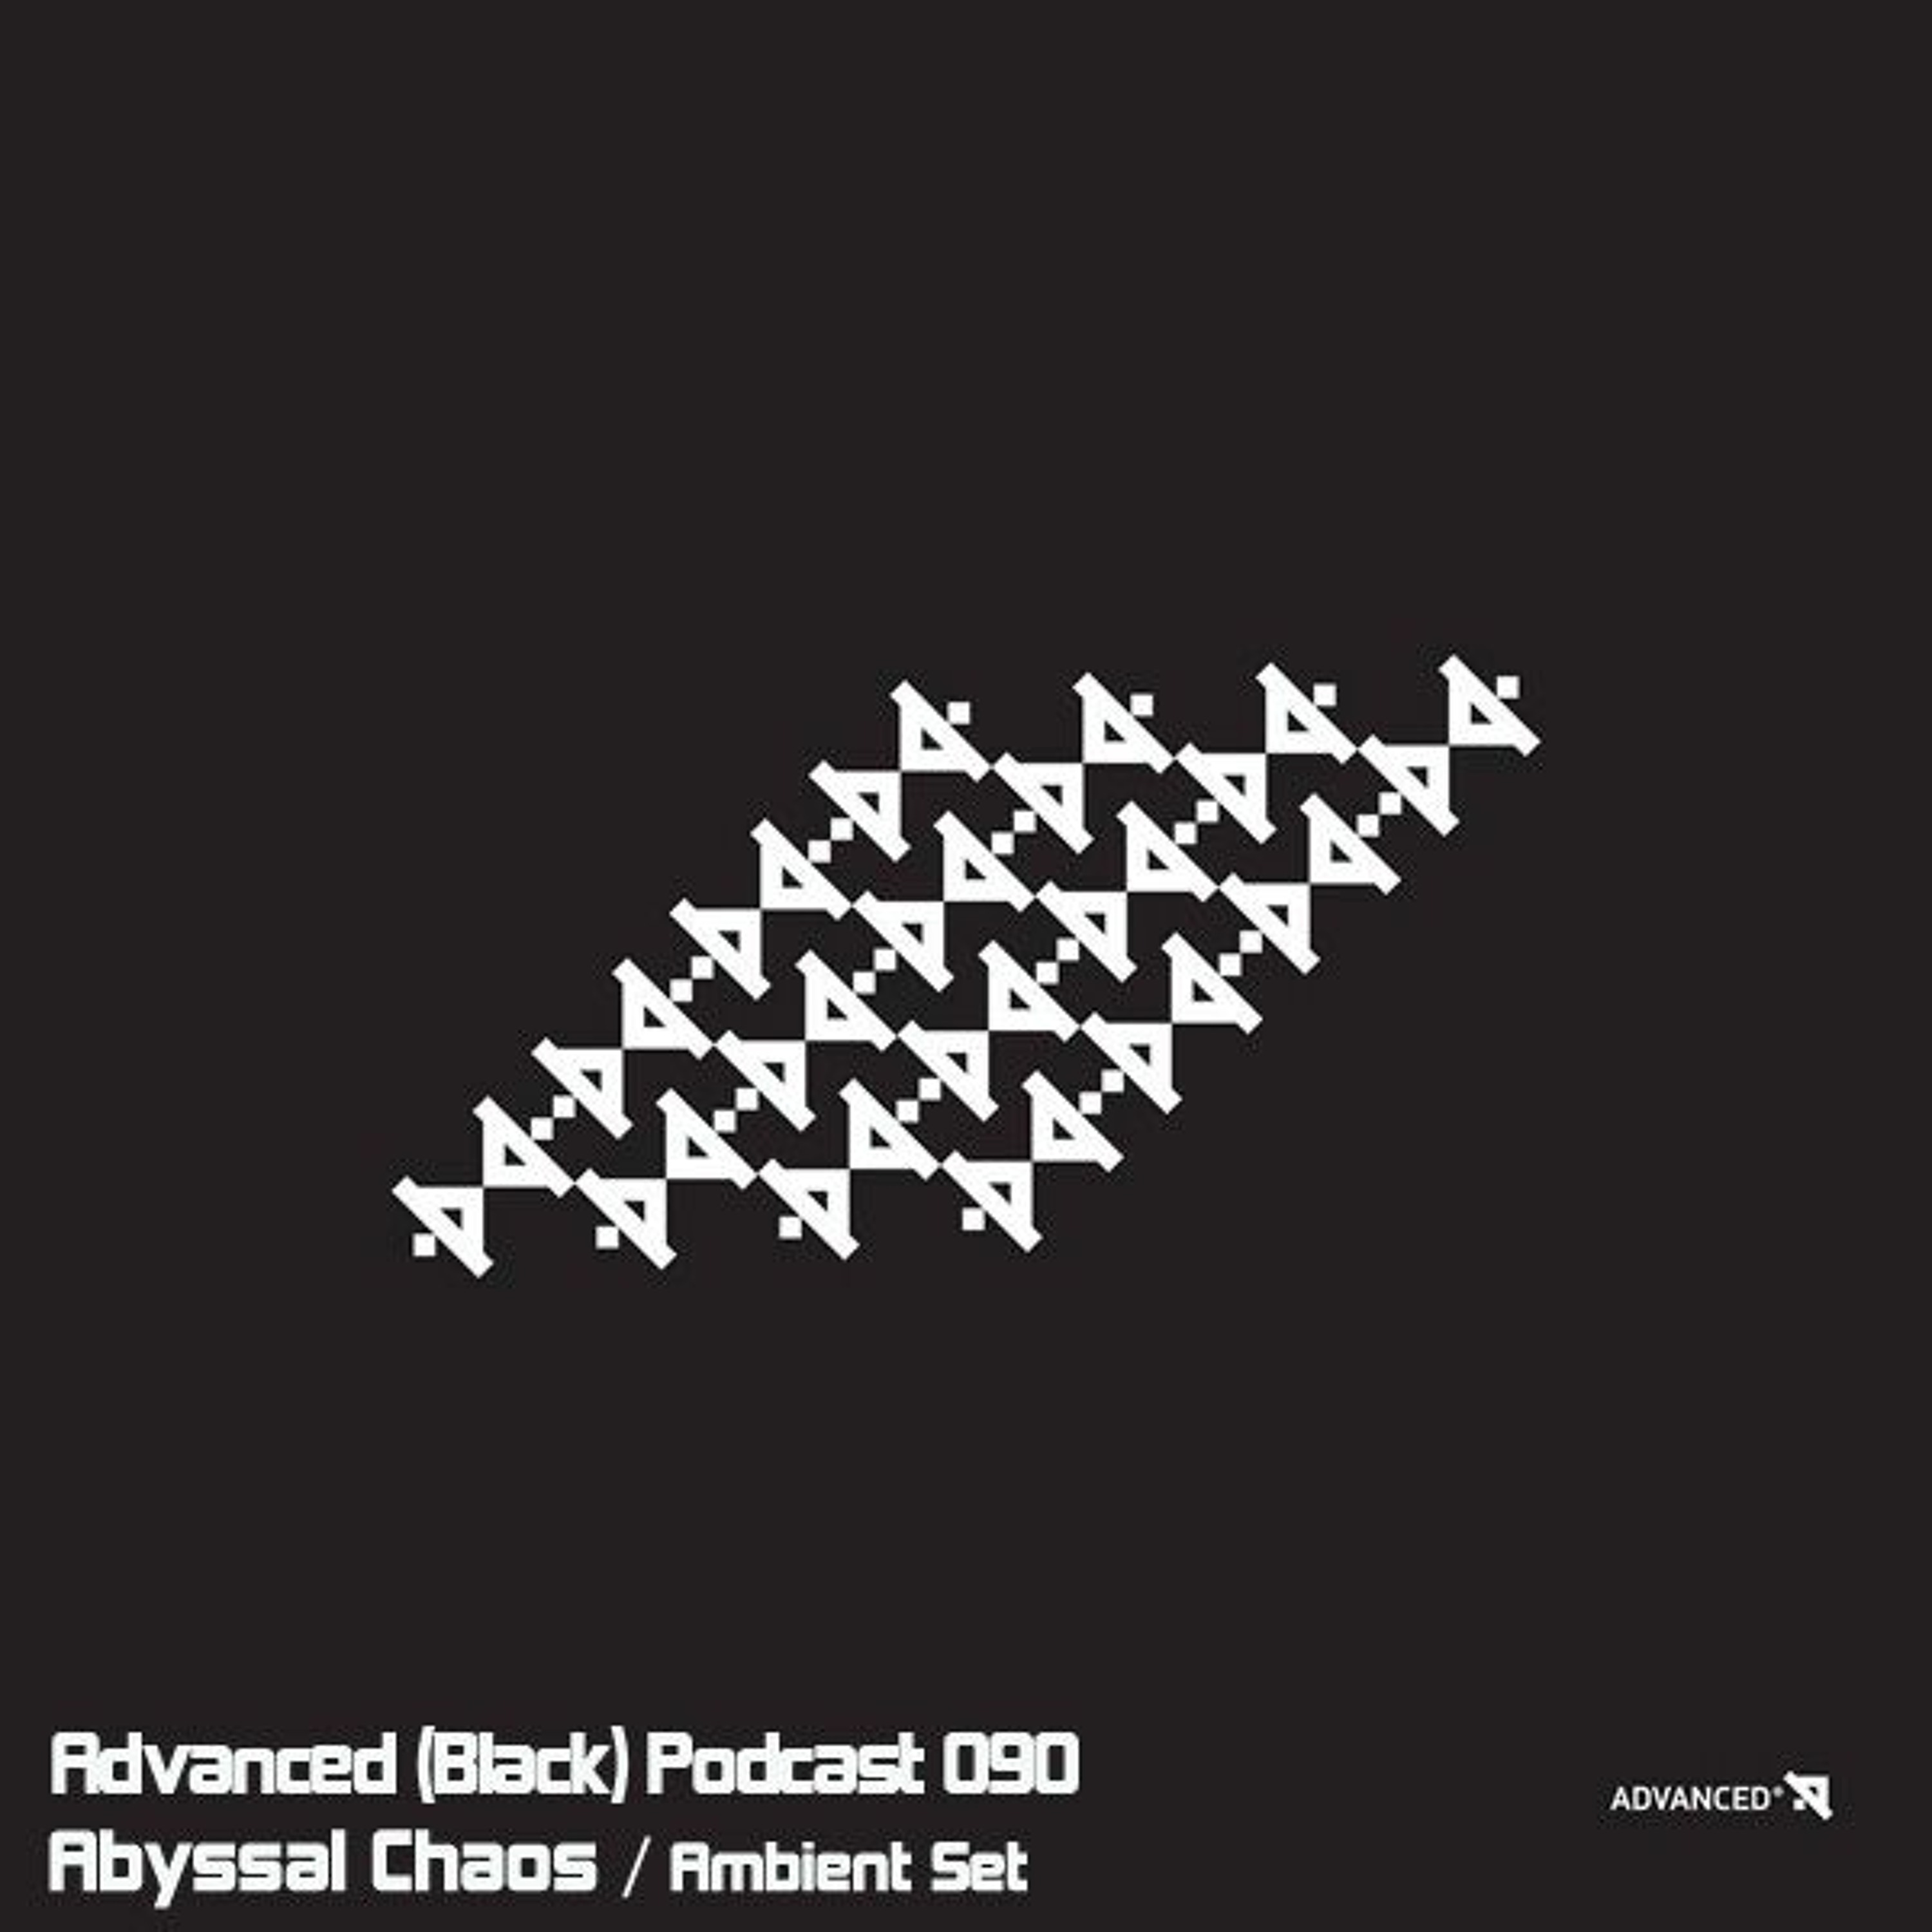 Advanced (Black) Podcast 090 with Abyssal Chaos / Ambient Set